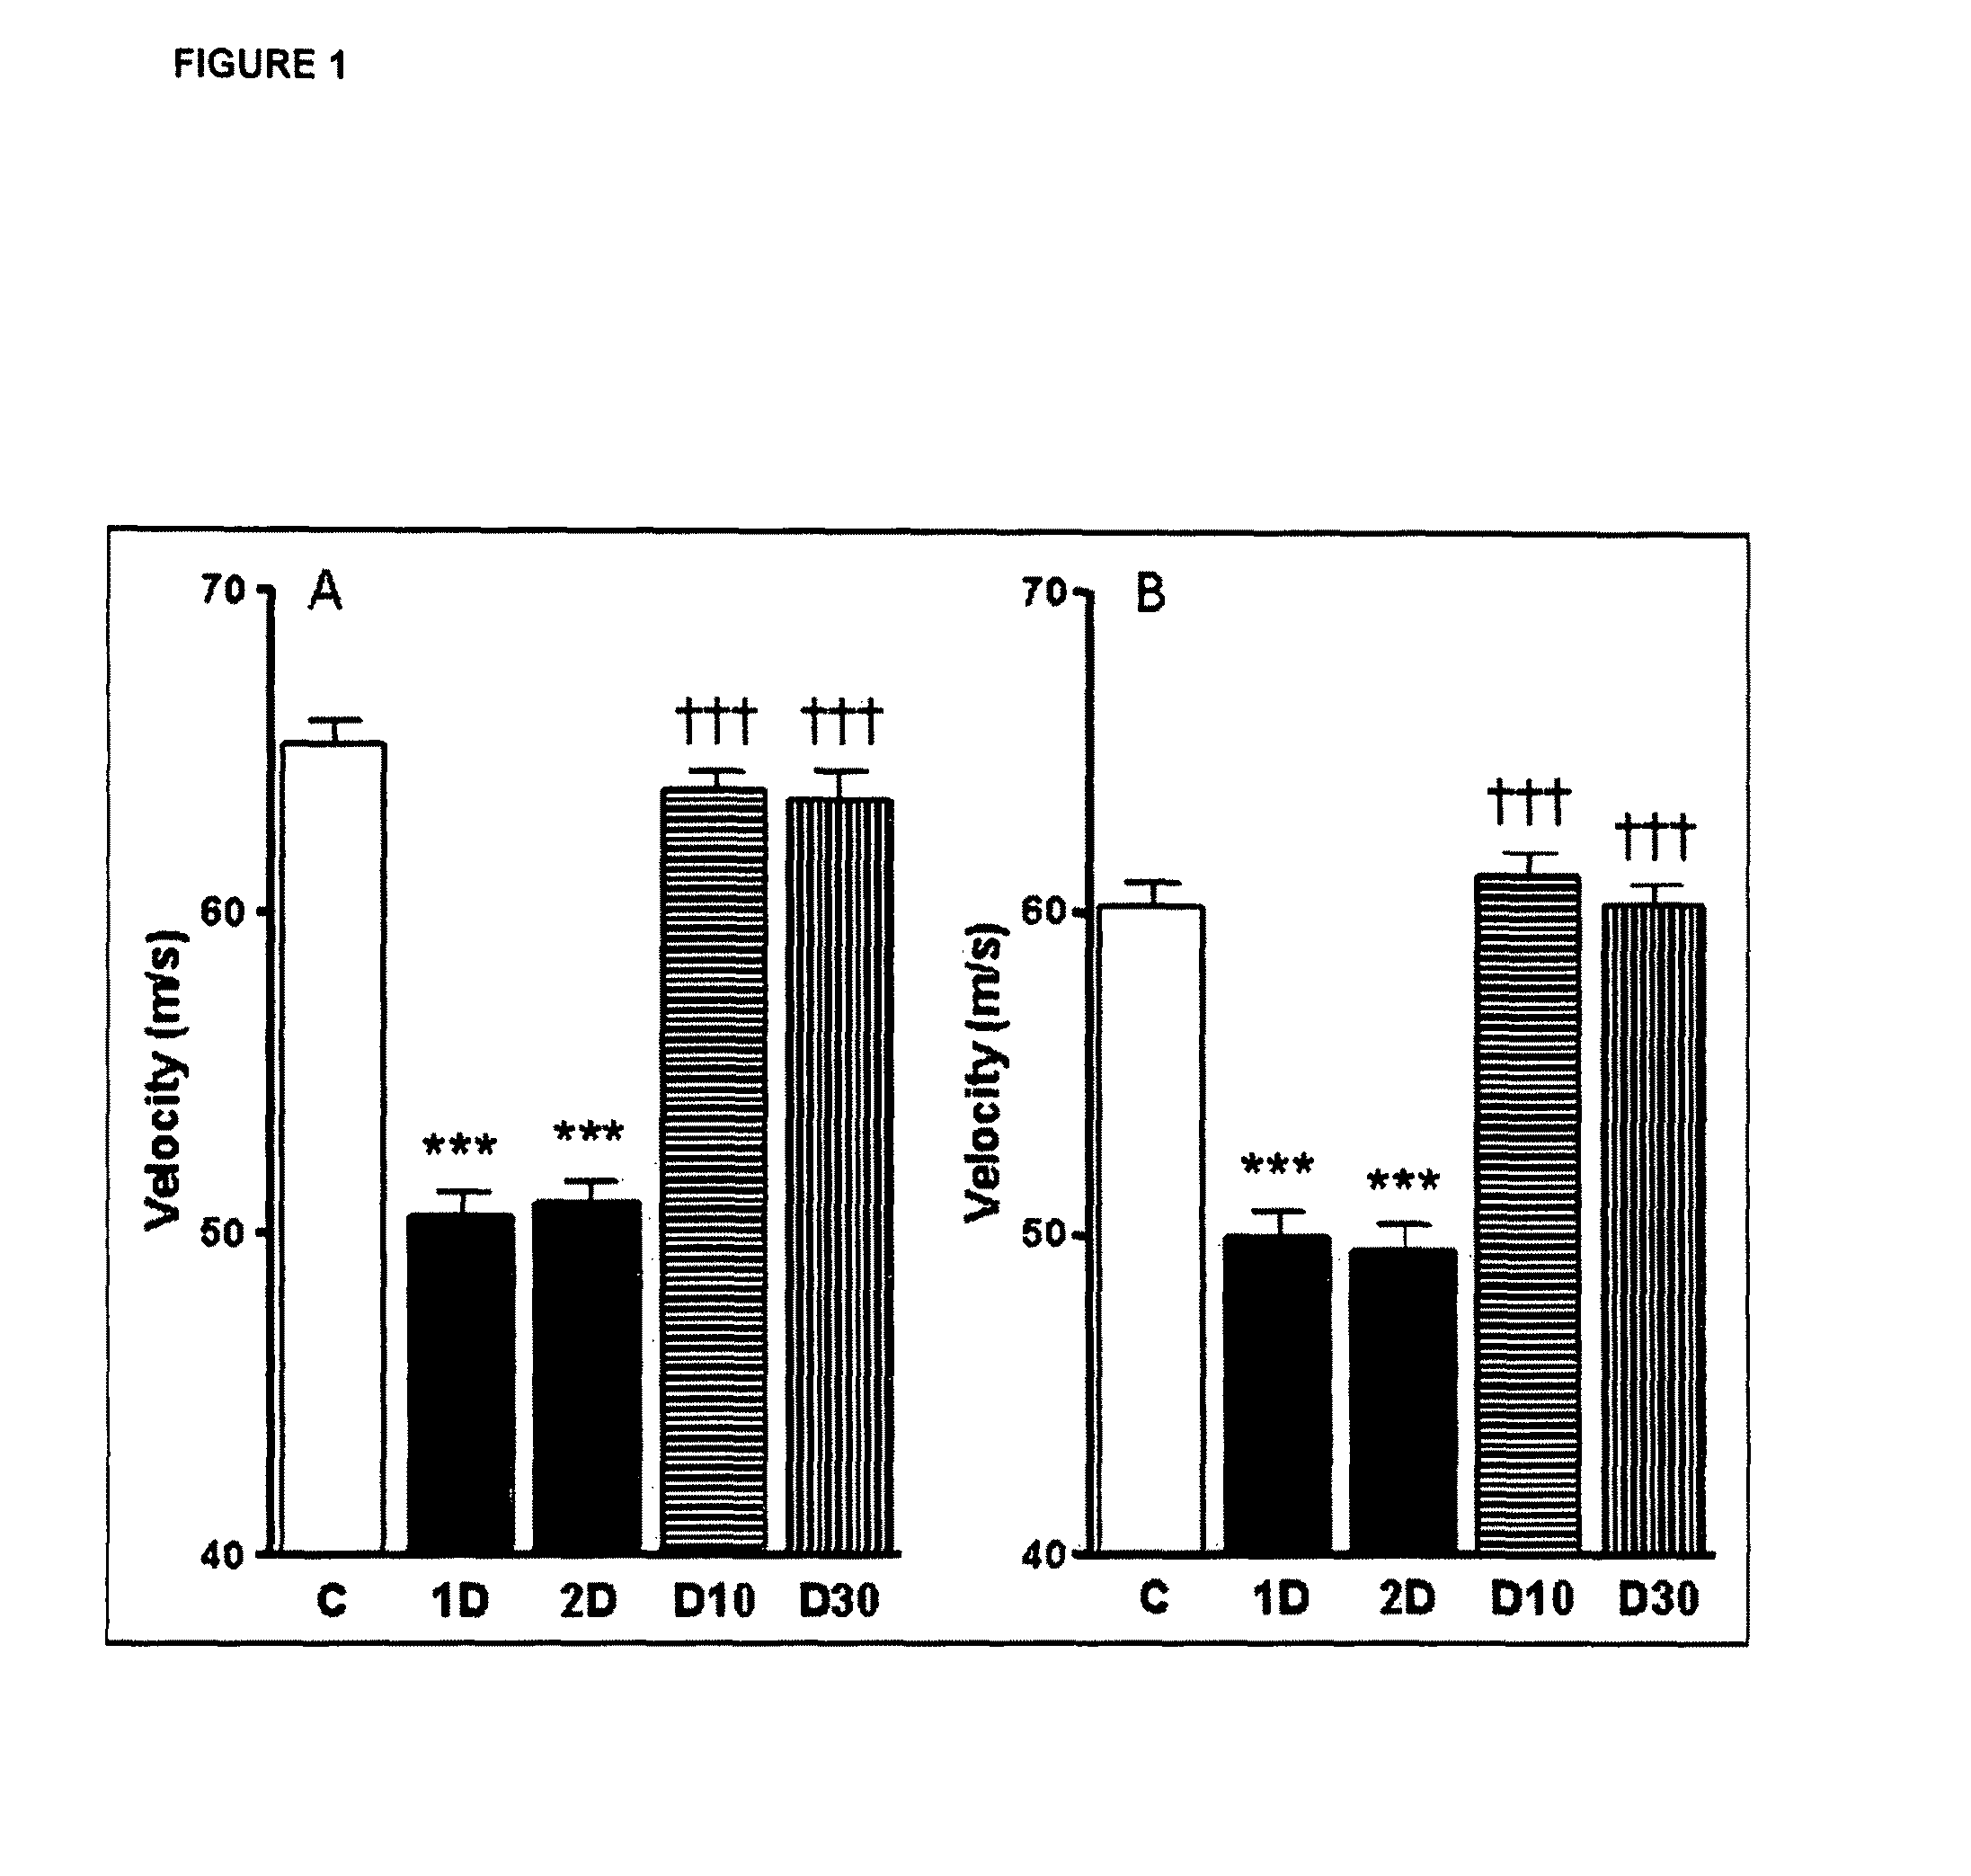 Method for inhibiting a microvascular complication by administering IL-6